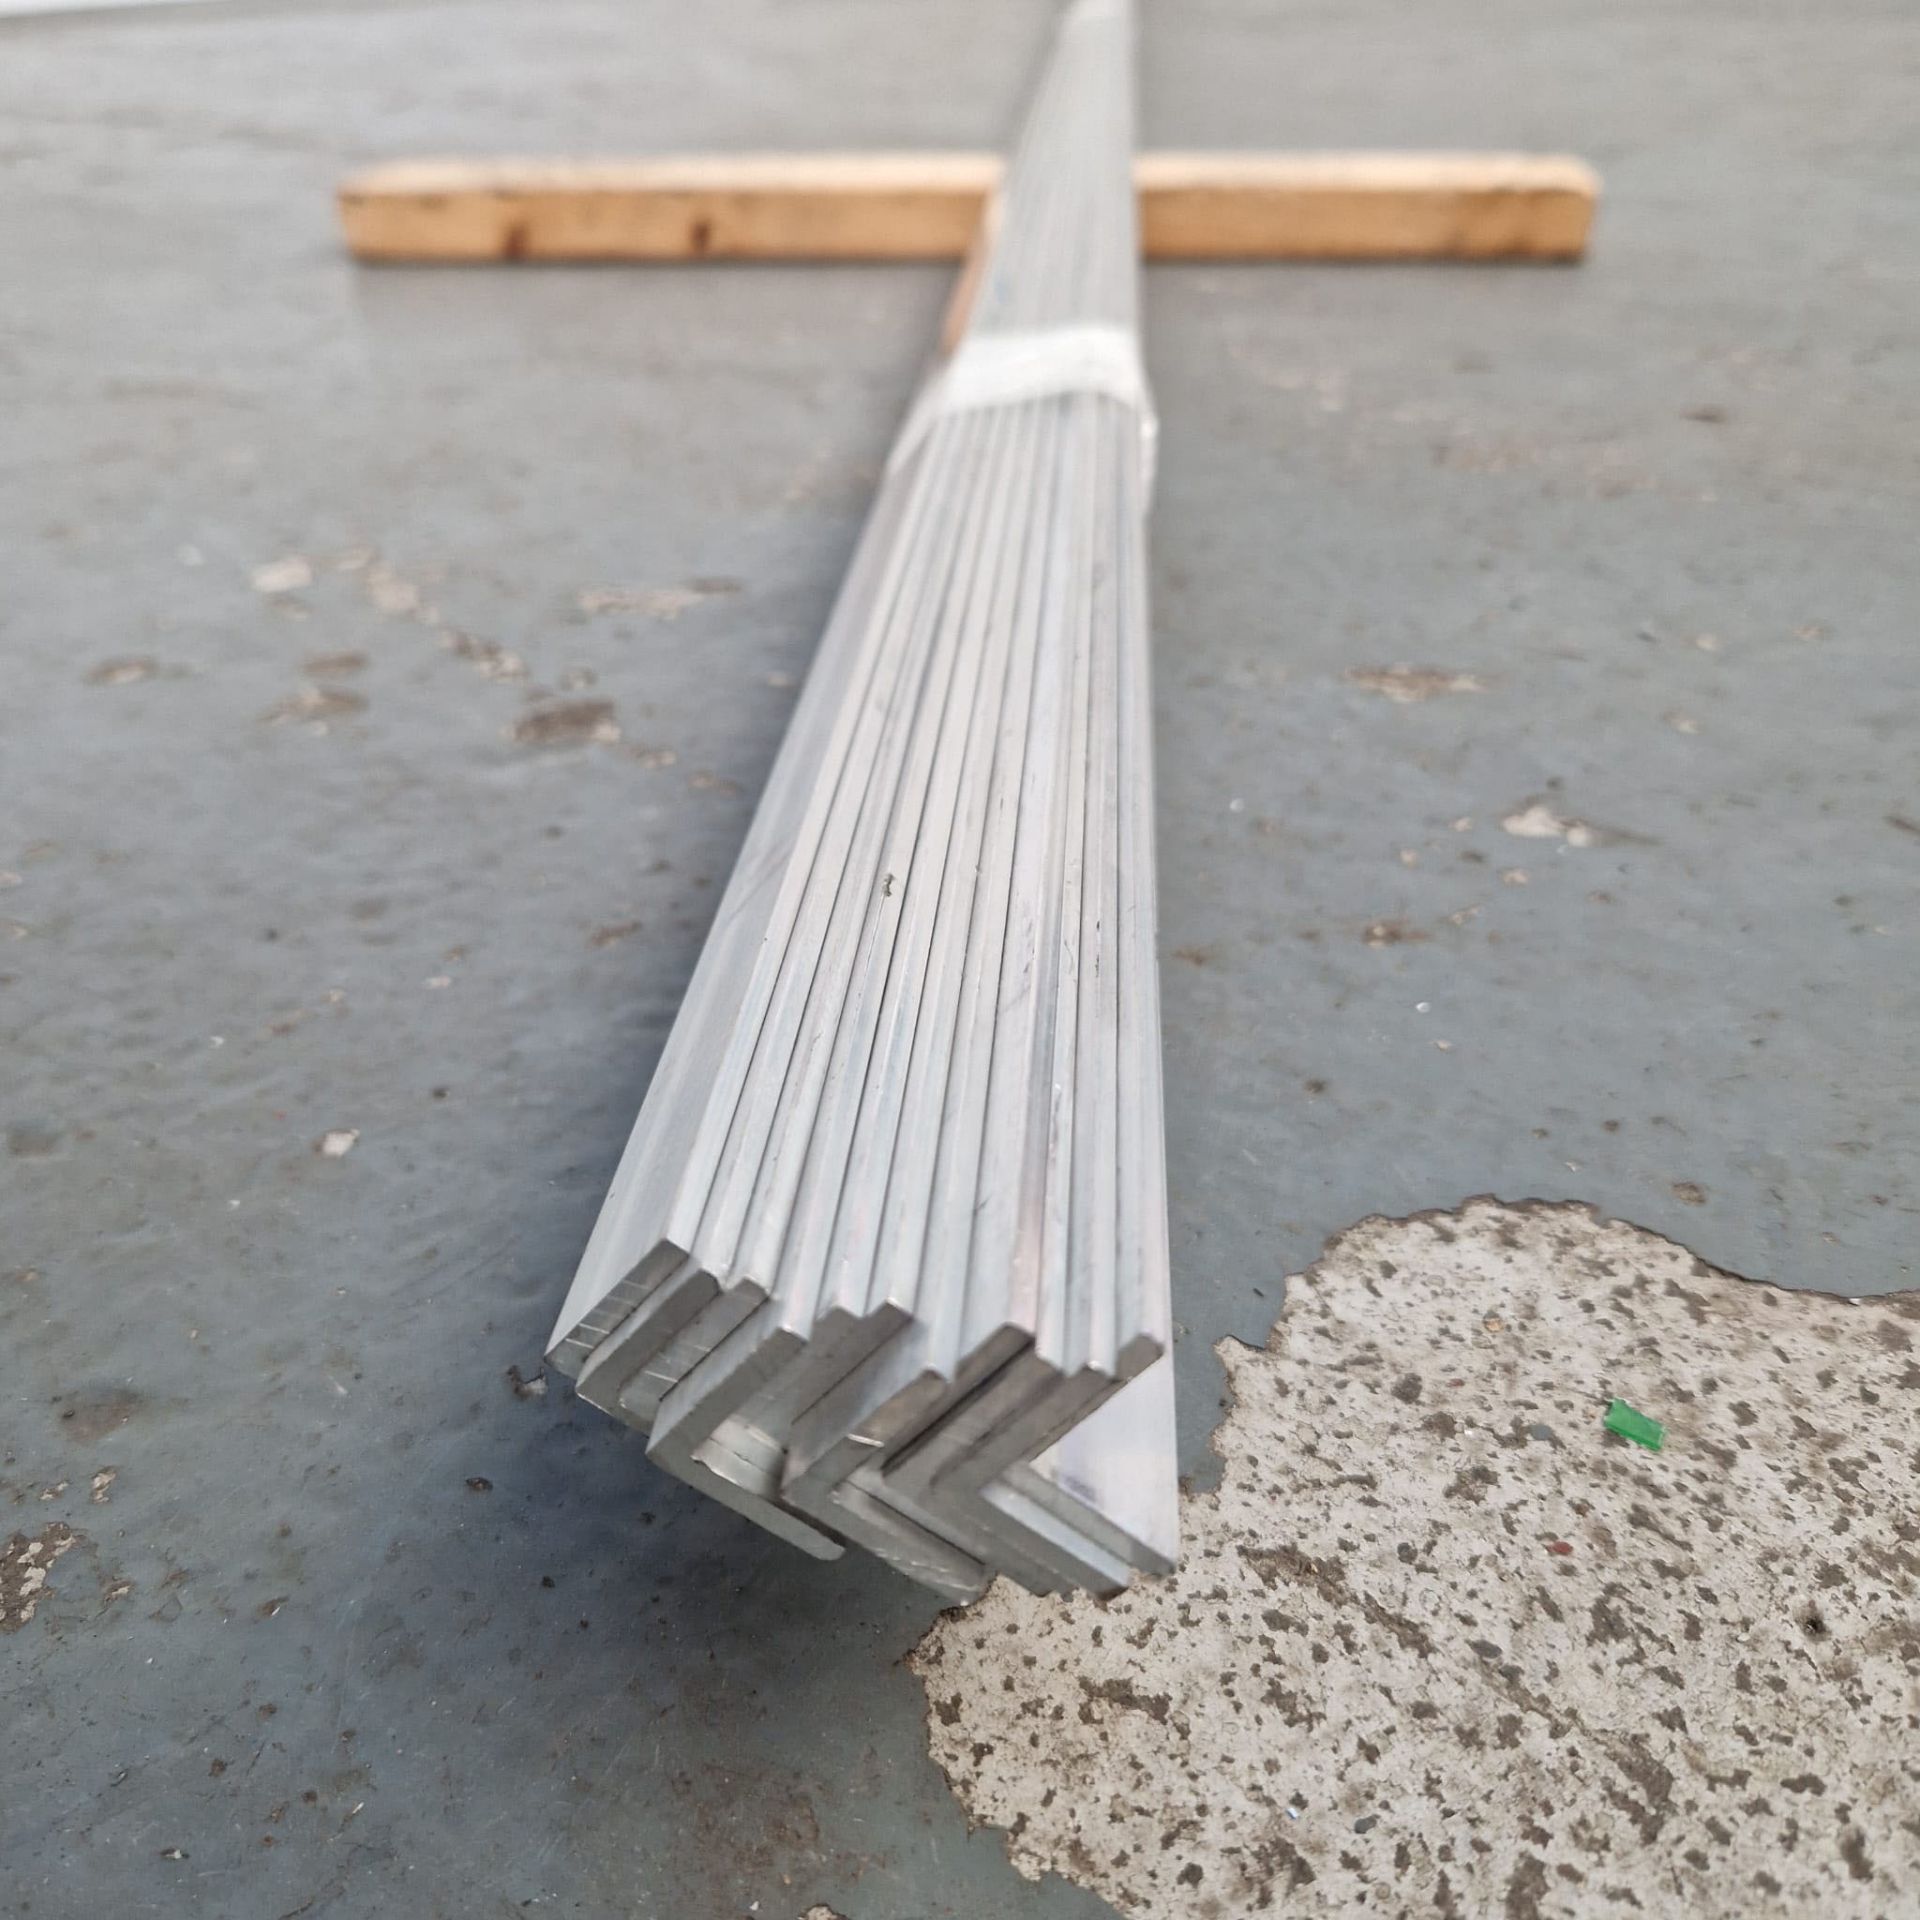 11 x Lengths of Aluminium 'L' Shape Angle Plate. Length: 5000mm. Dimensions: 22 x 22 x 3mm. - Image 6 of 7